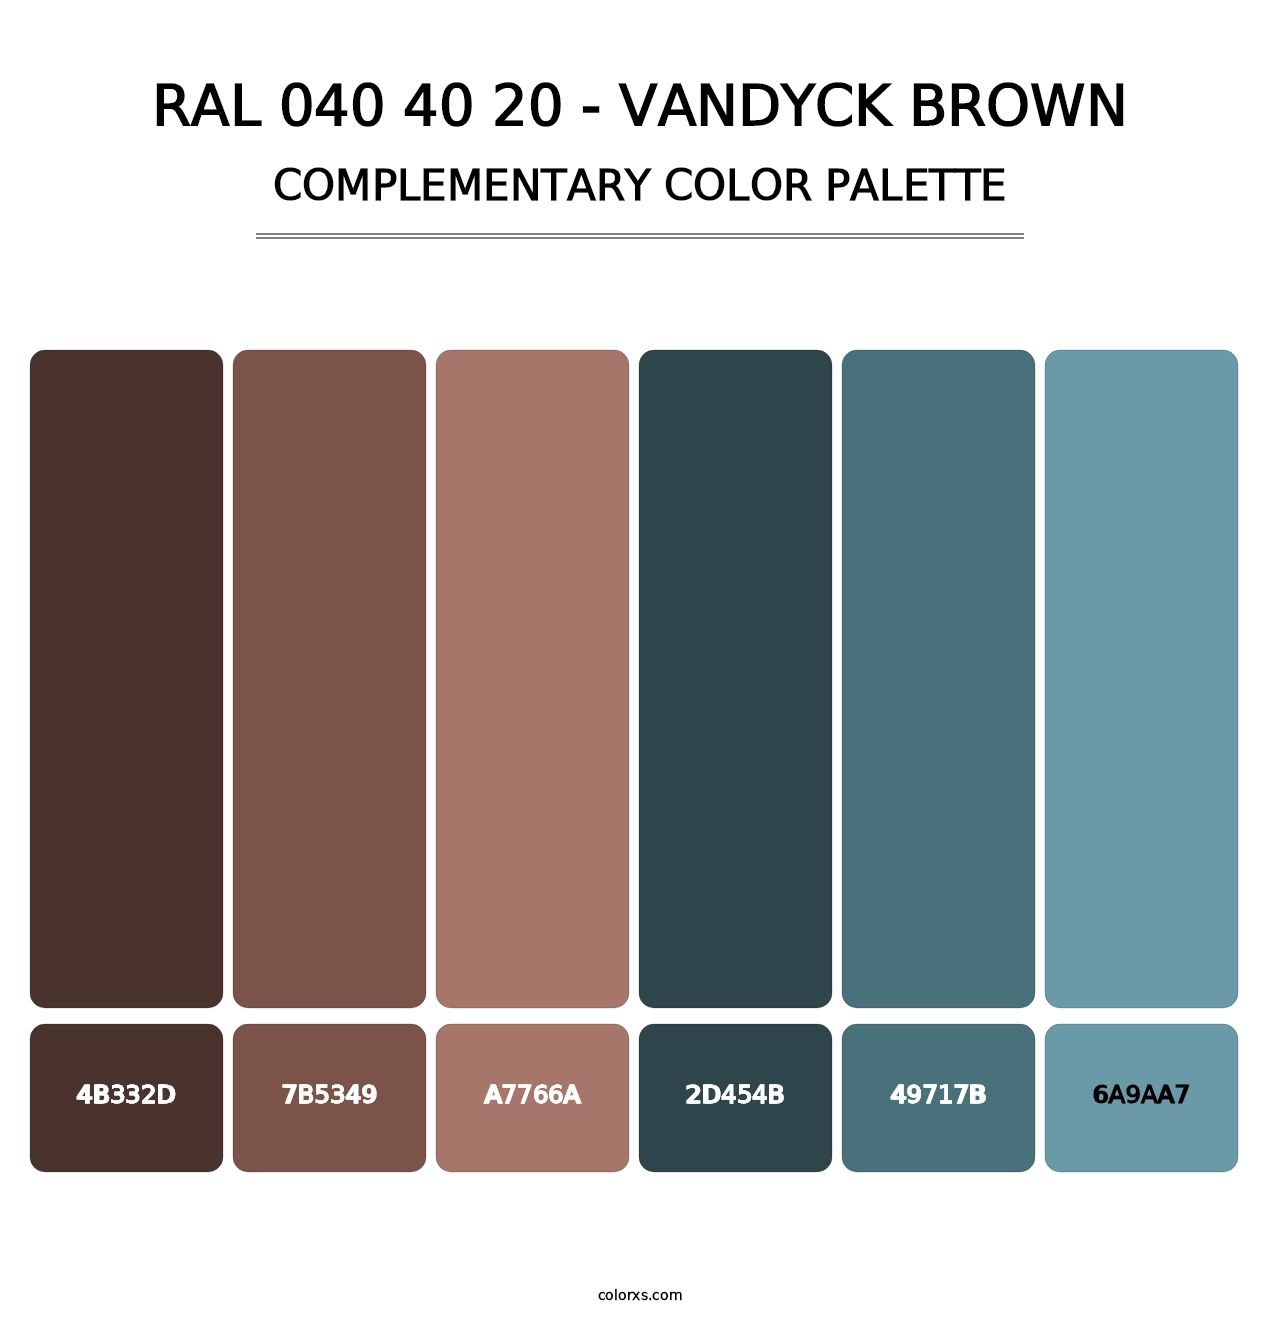 RAL 040 40 20 - Vandyck Brown - Complementary Color Palette